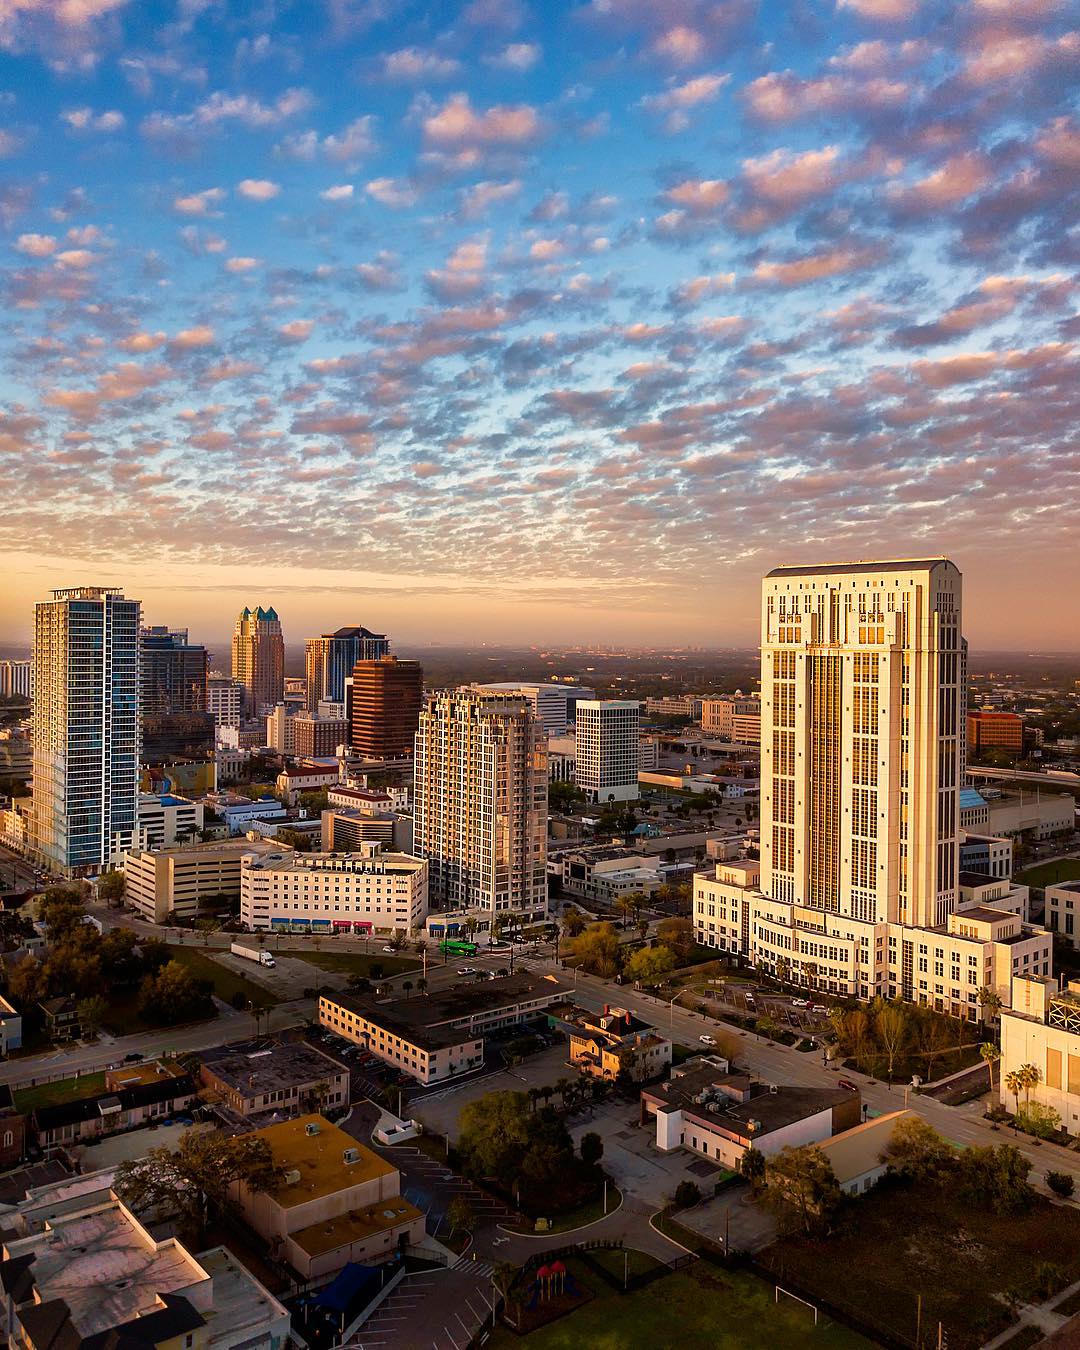 Tall buildings in Downtown Orlando at sunset. Photo by Instagram user @stevenmadow